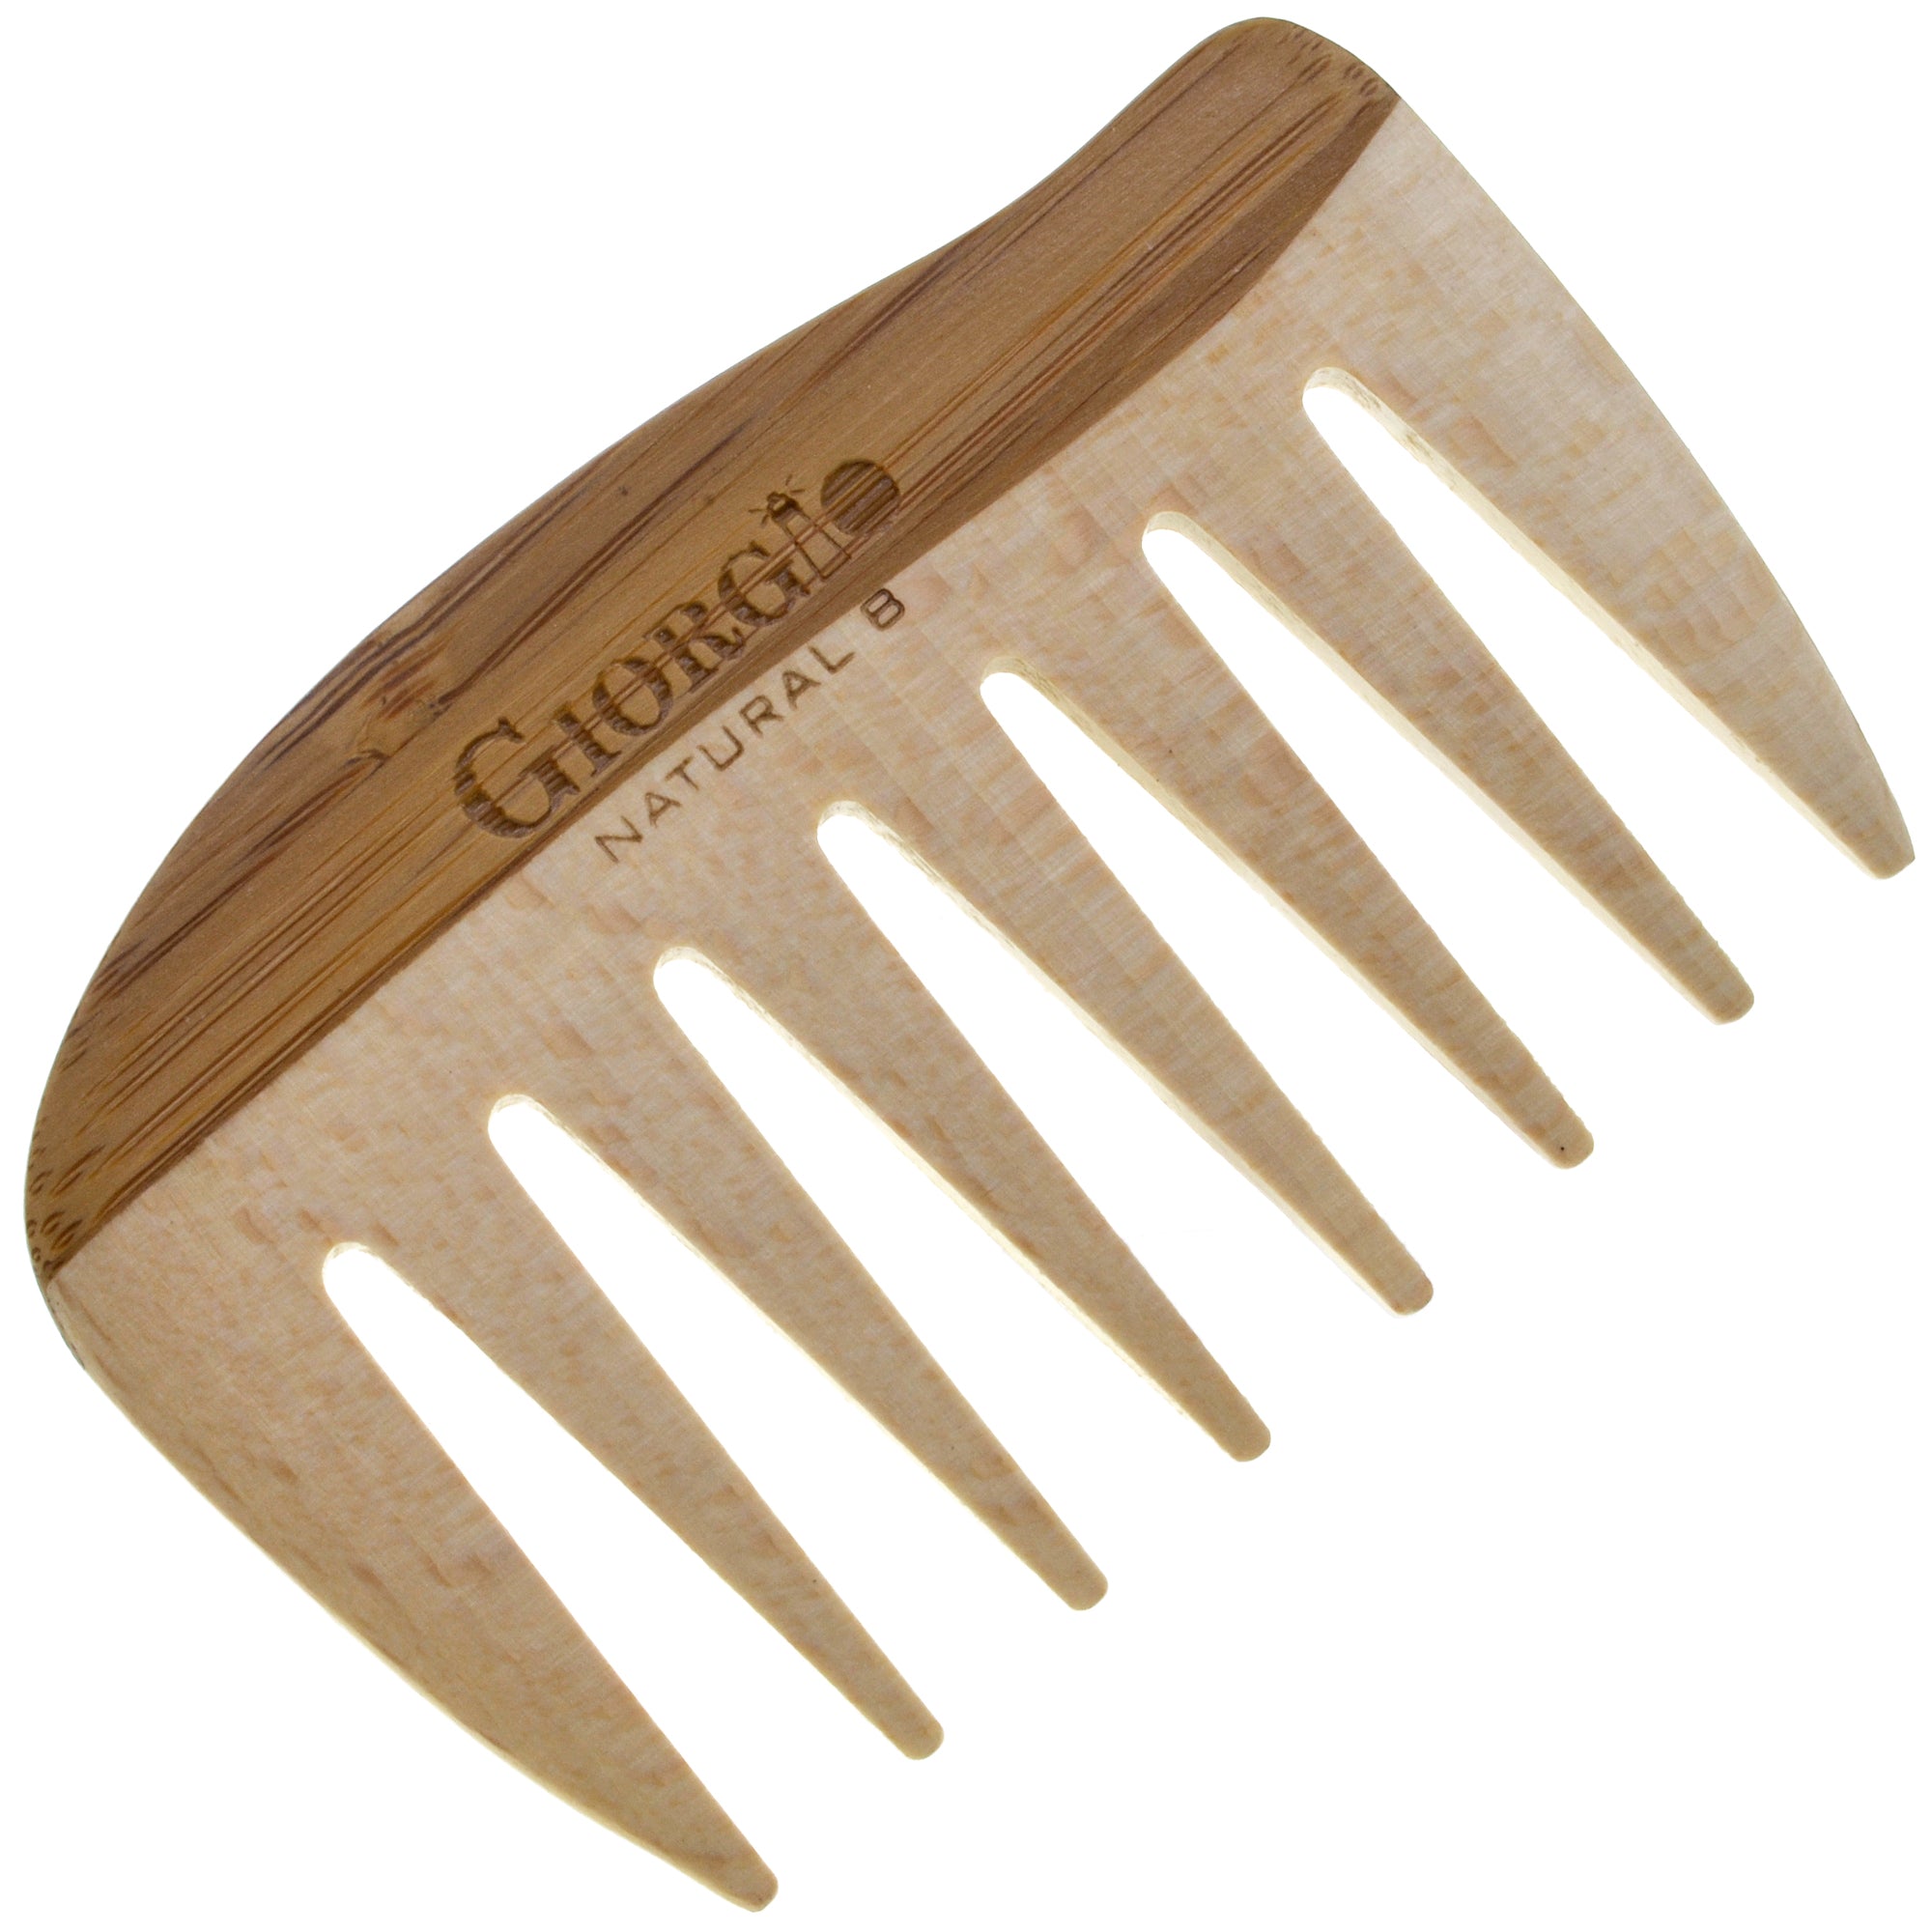 Giorgio 4" Wooden Wide Tooth Detangling Comb